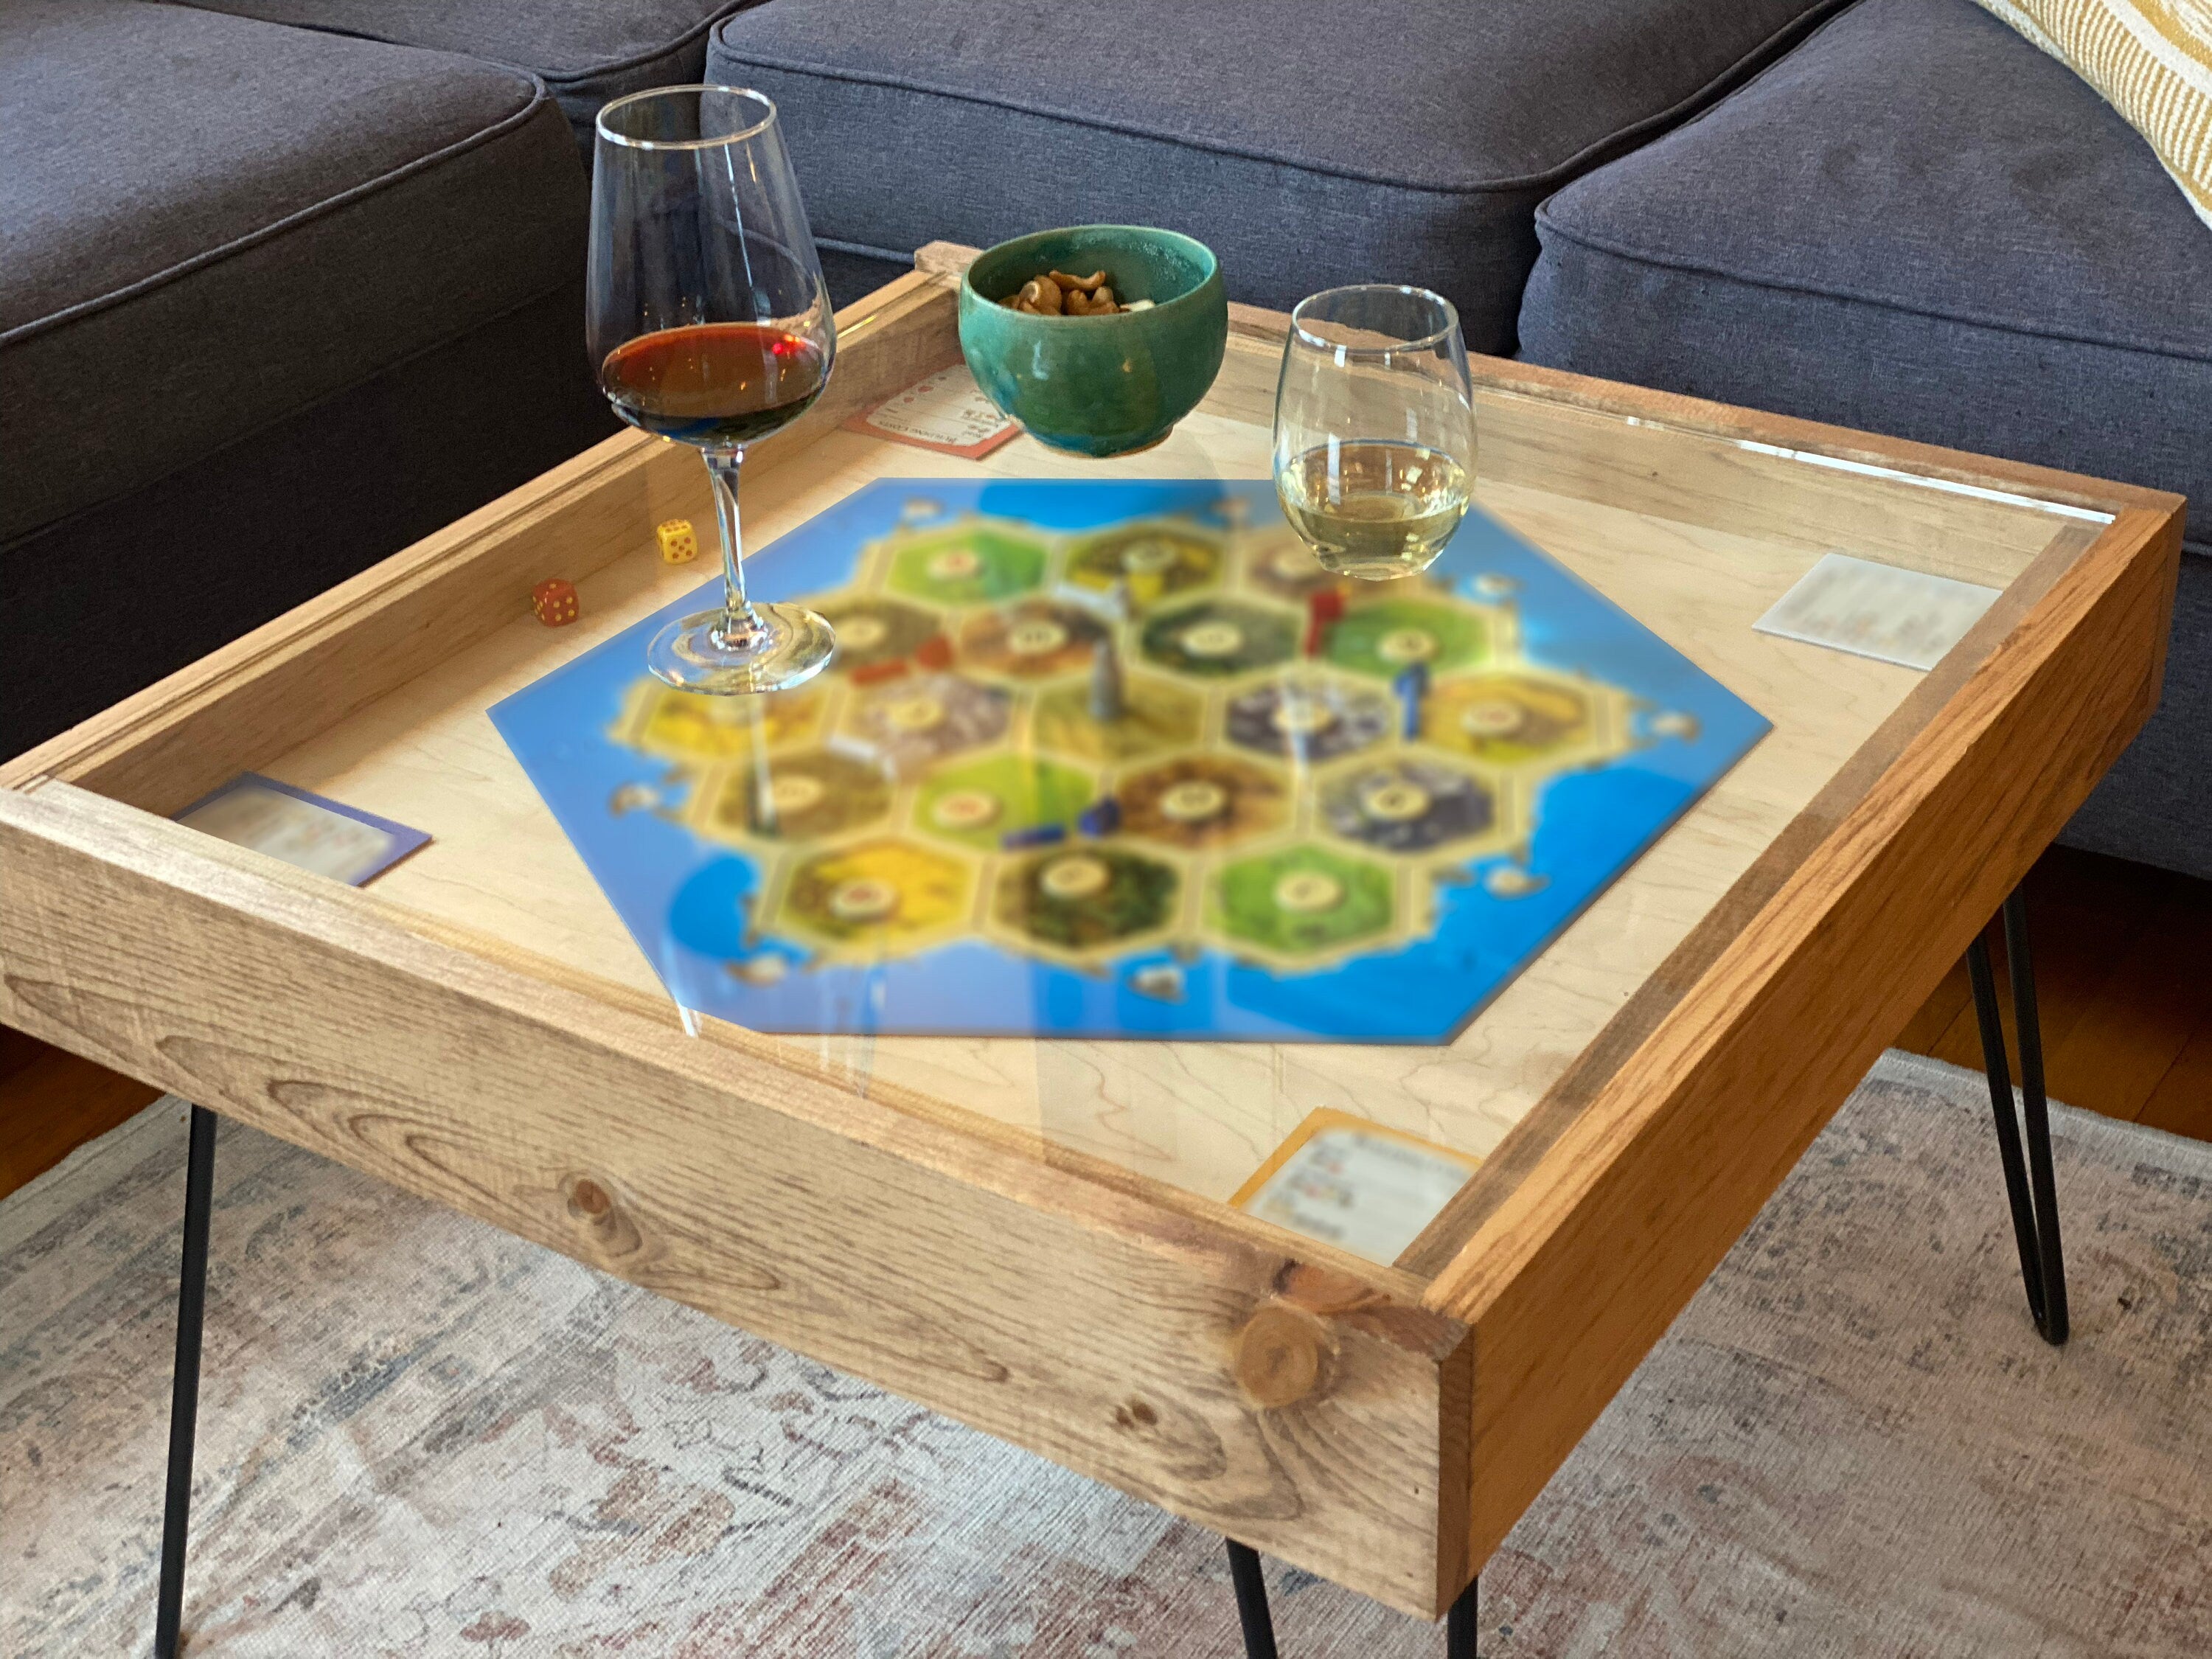 Rustic BYO Board Game Table with Removable Tempered Glass Top and Hidden Storage Drawer - 100% Made in the USA. Measures 25x25"